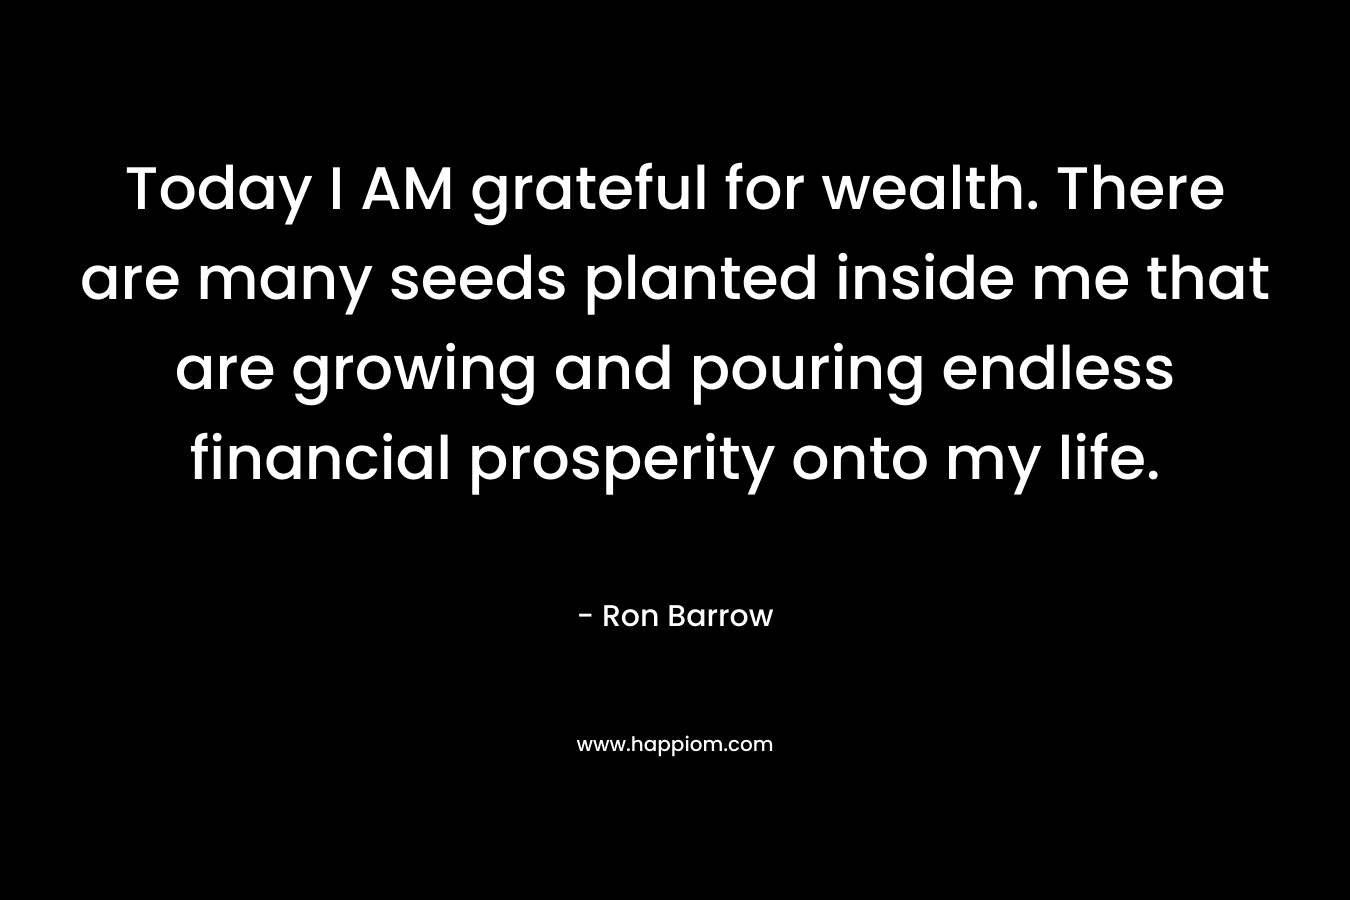 Today I AM grateful for wealth. There are many seeds planted inside me that are growing and pouring endless financial prosperity onto my life.